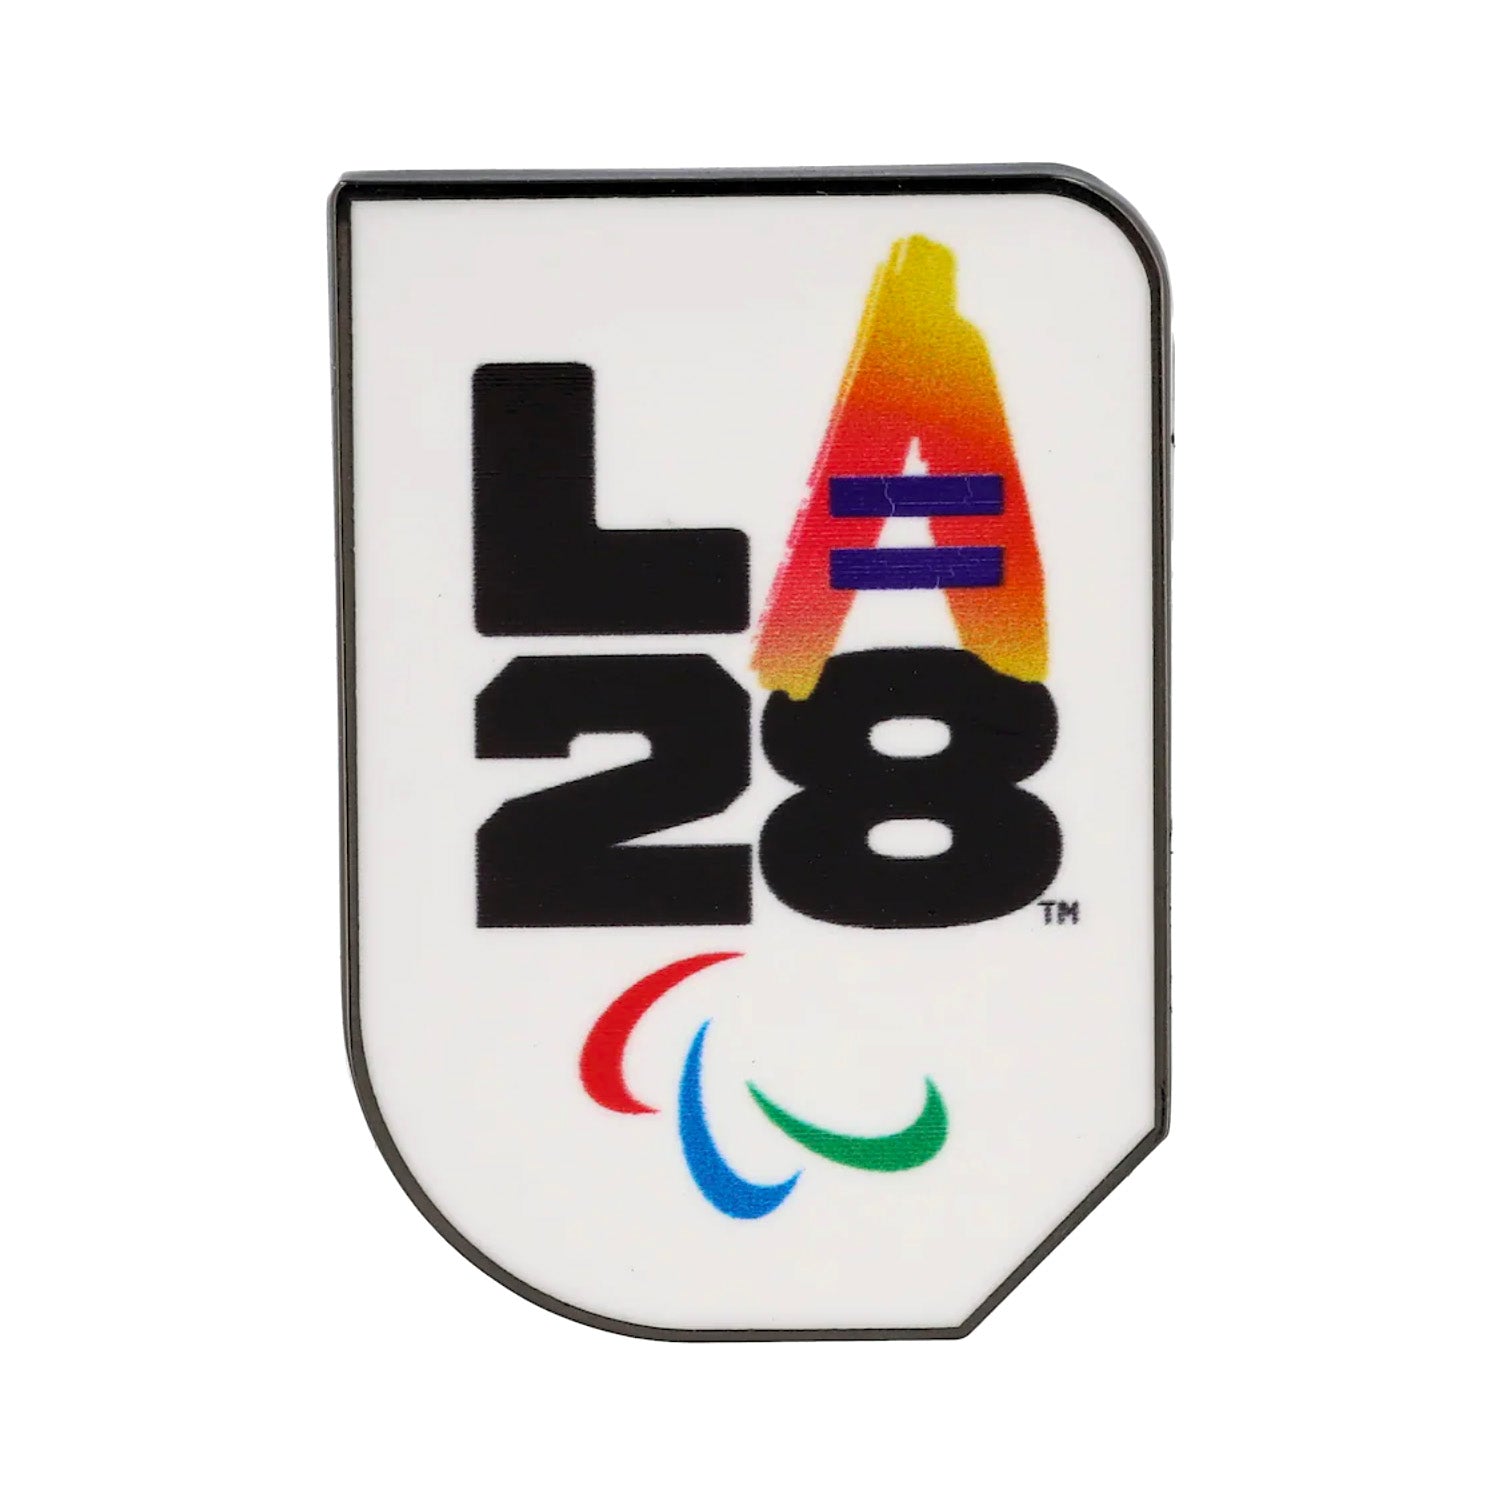 LA 2028 Paralympics Logo in Equality